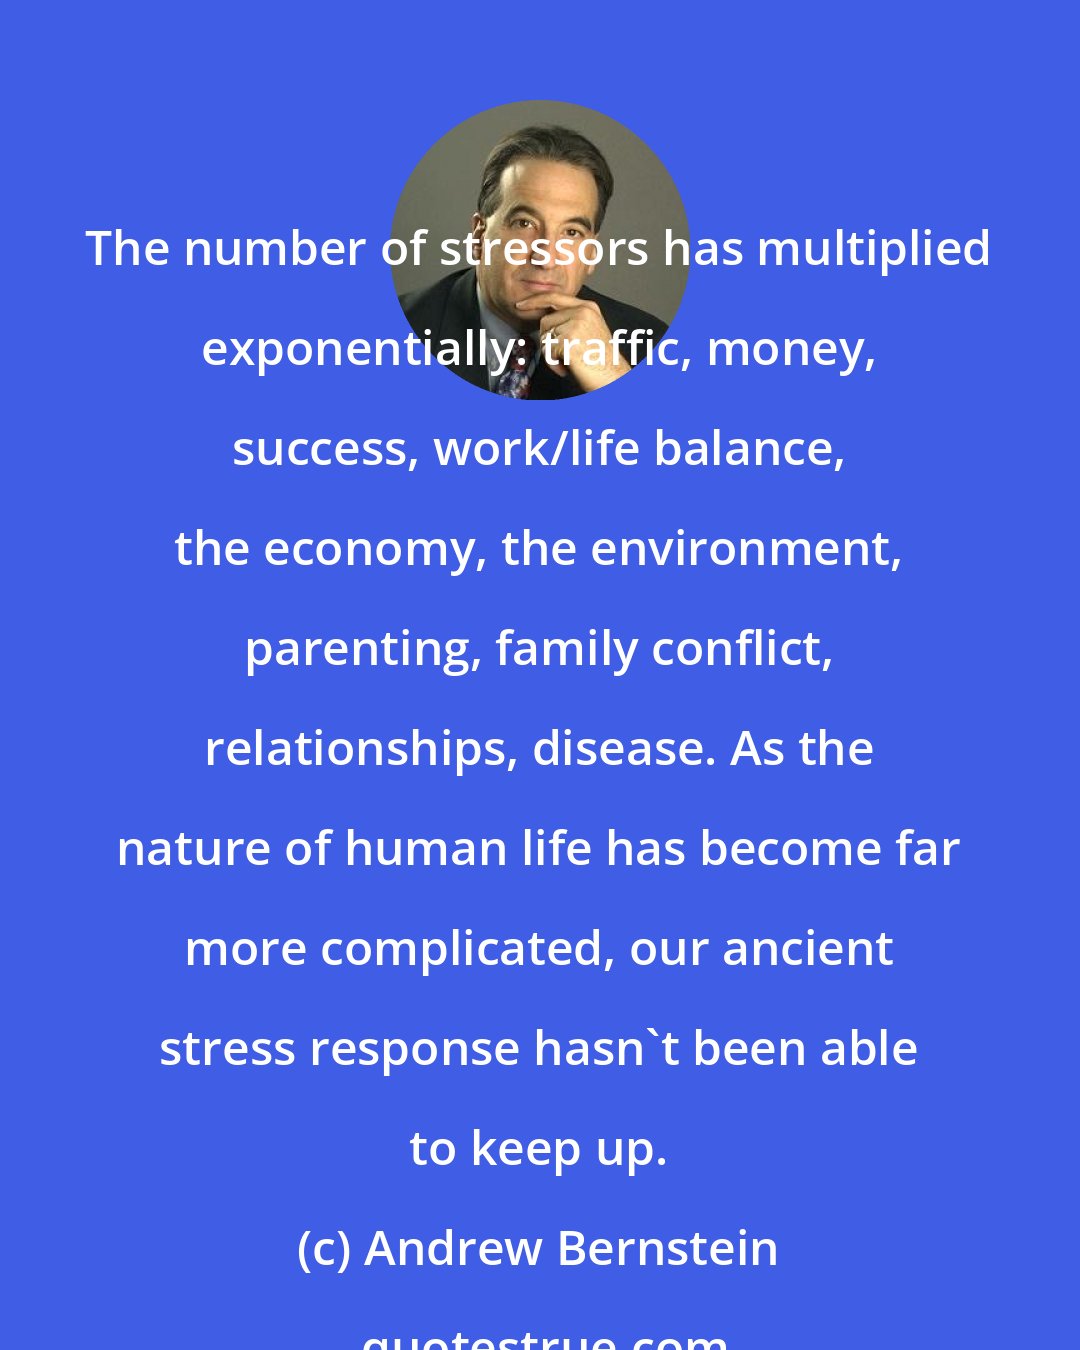 Andrew Bernstein: The number of stressors has multiplied exponentially: traffic, money, success, work/life balance, the economy, the environment, parenting, family conflict, relationships, disease. As the nature of human life has become far more complicated, our ancient stress response hasn't been able to keep up.